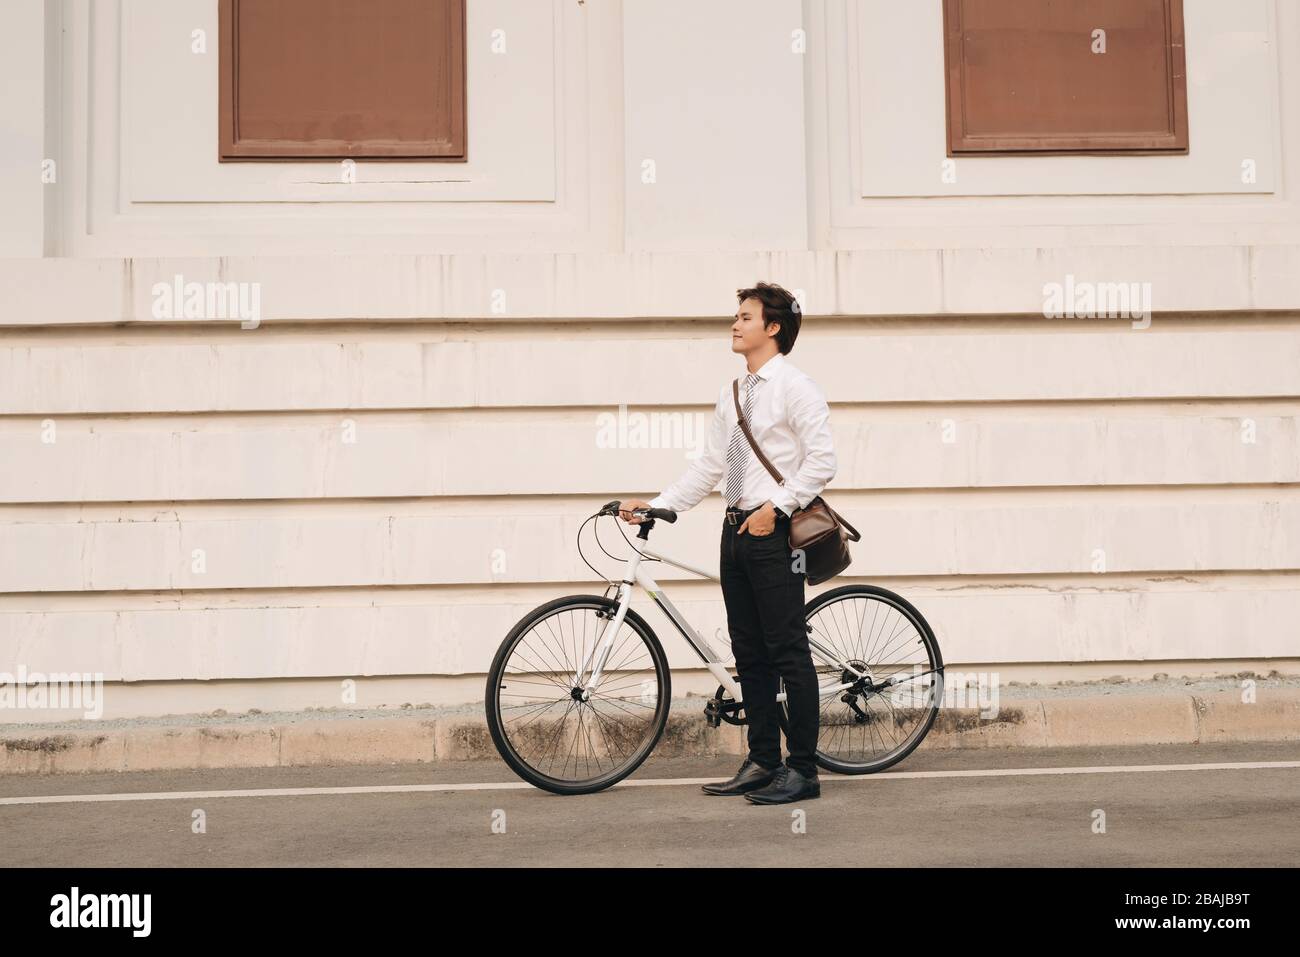 Outdoor portrait of handsome young man with fixed gear bicycle in the street. Stock Photo